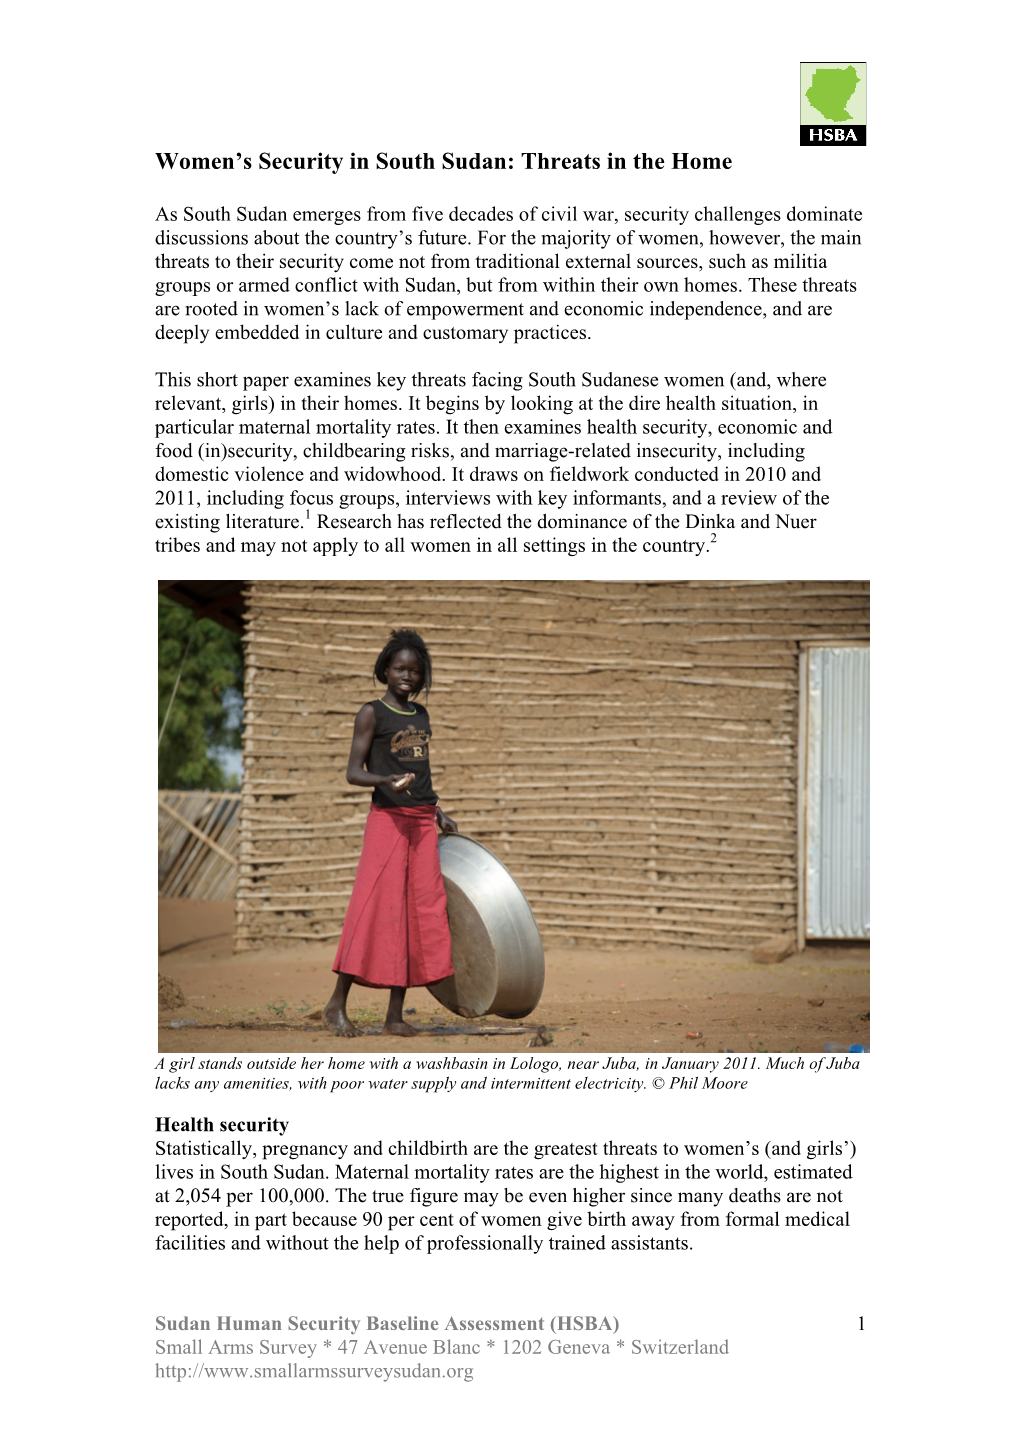 Women's Security in South Sudan: Threats in the Home